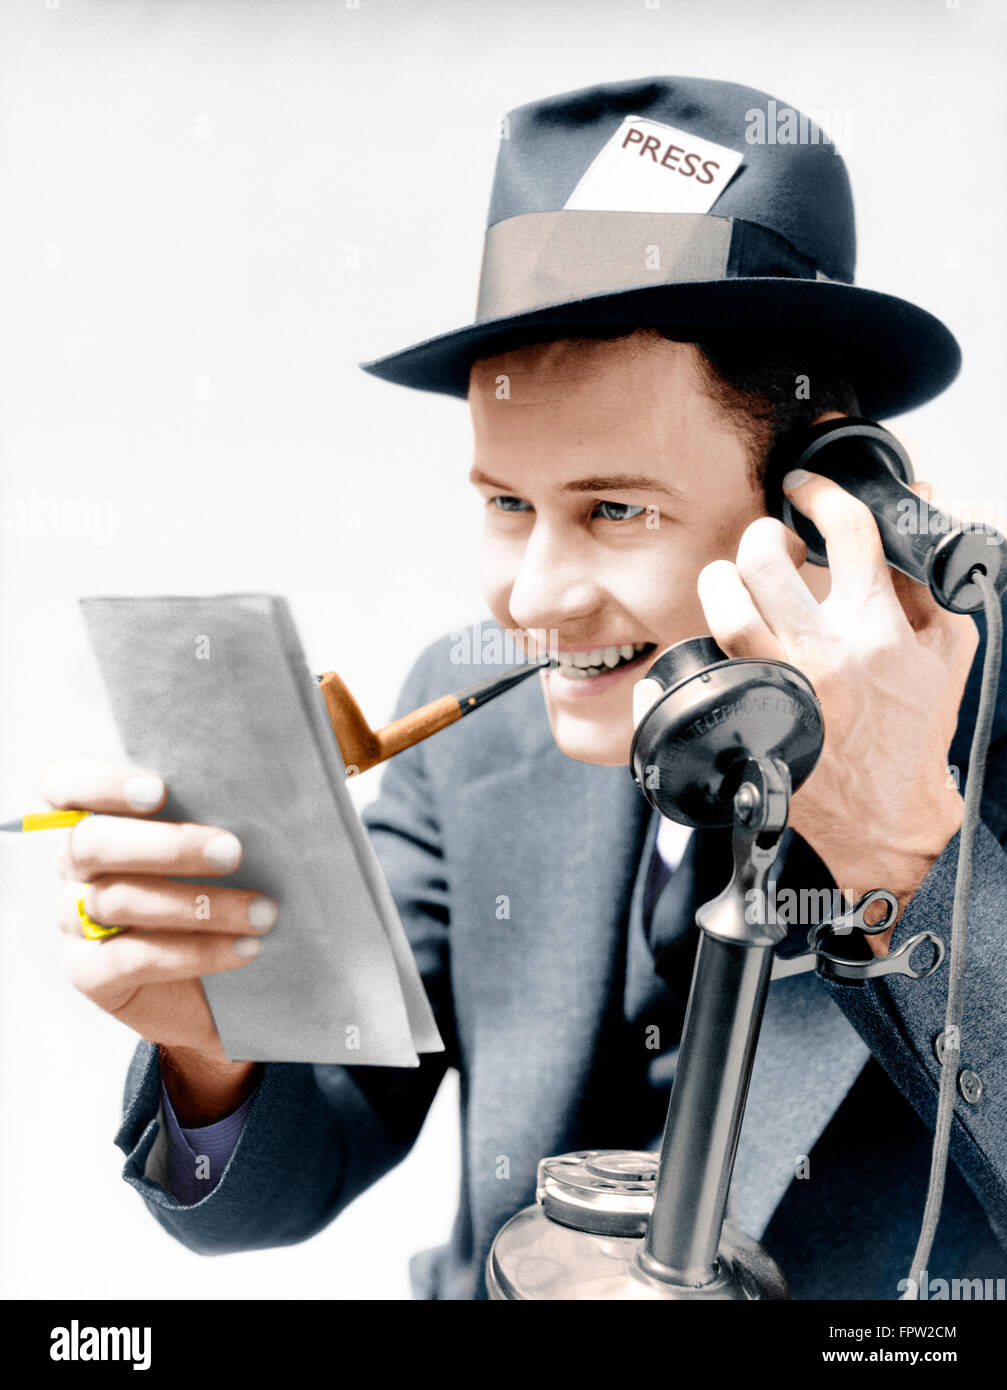 [Image: 1930s-excited-man-newspaper-reporter-smo...FPW2CM.jpg]